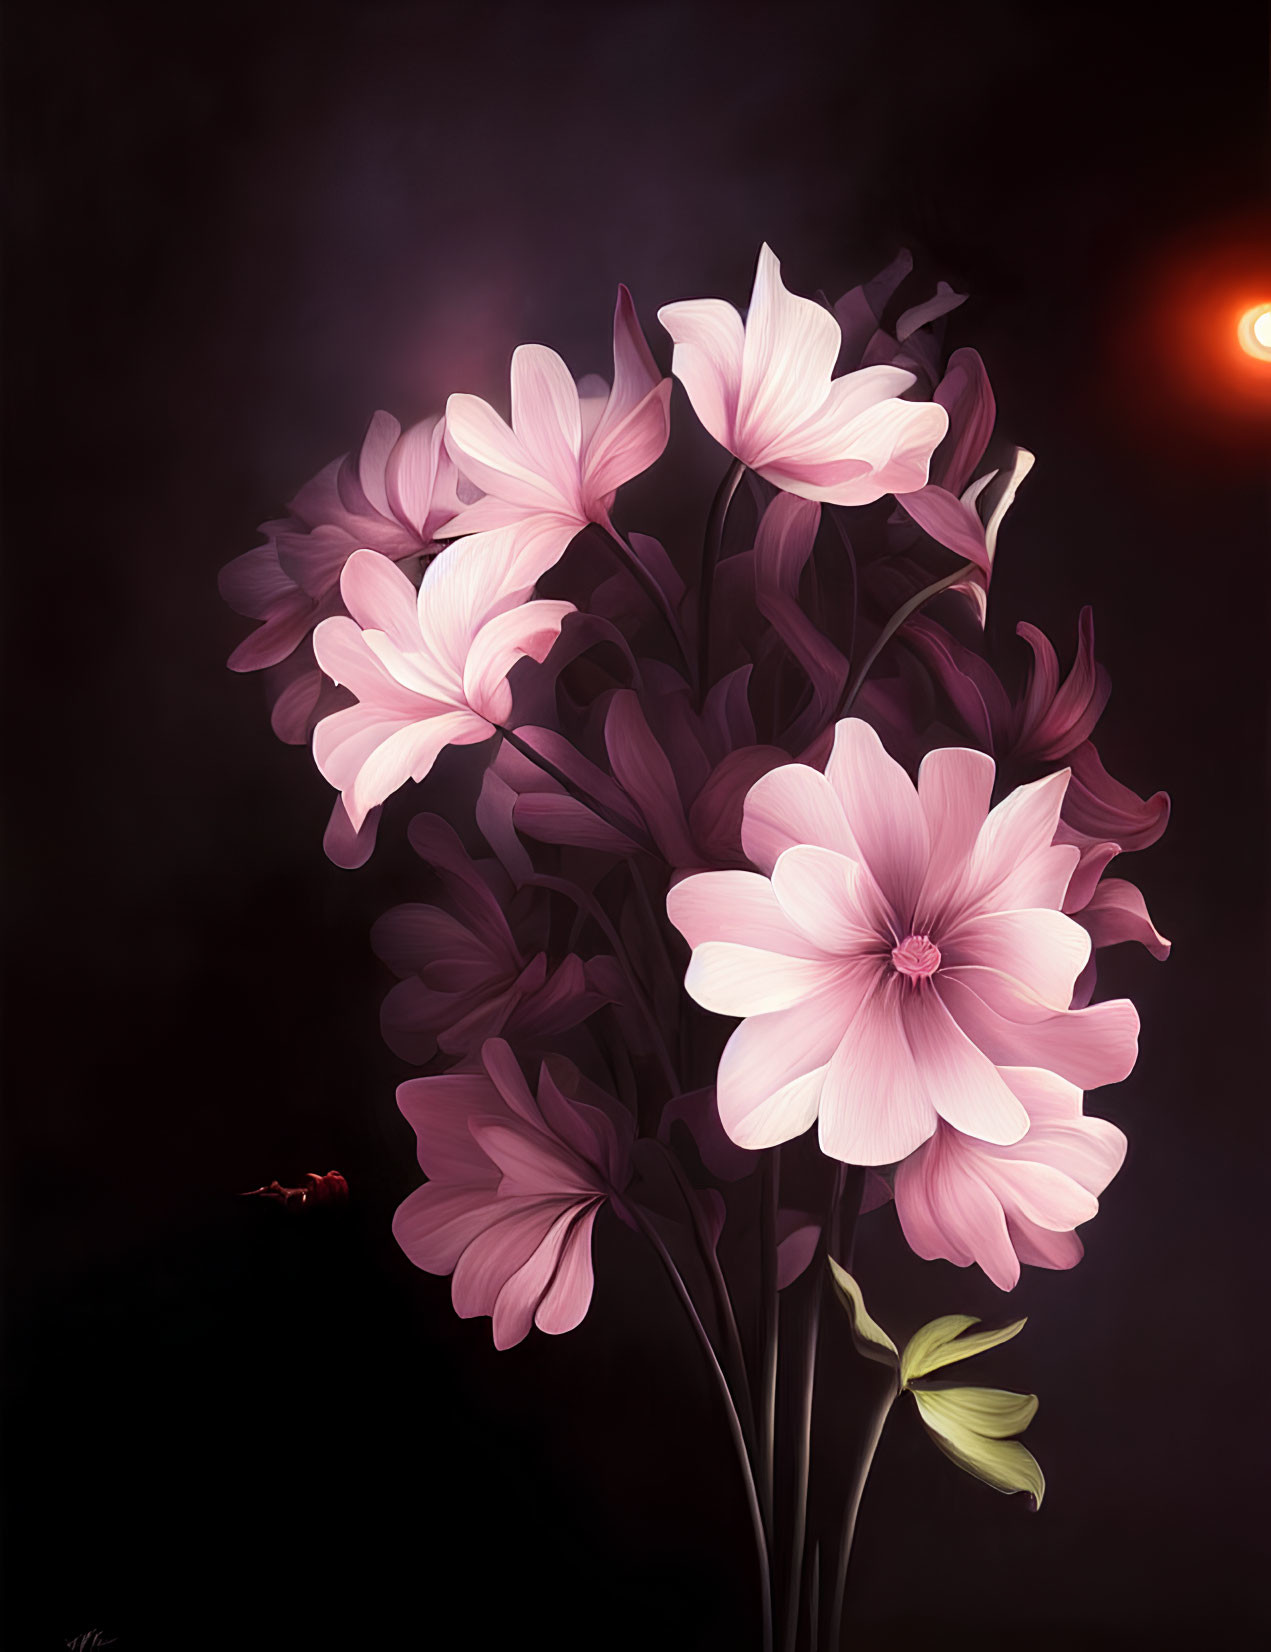 Vibrant pink flowers on dark background with glowing red spot and flying insect